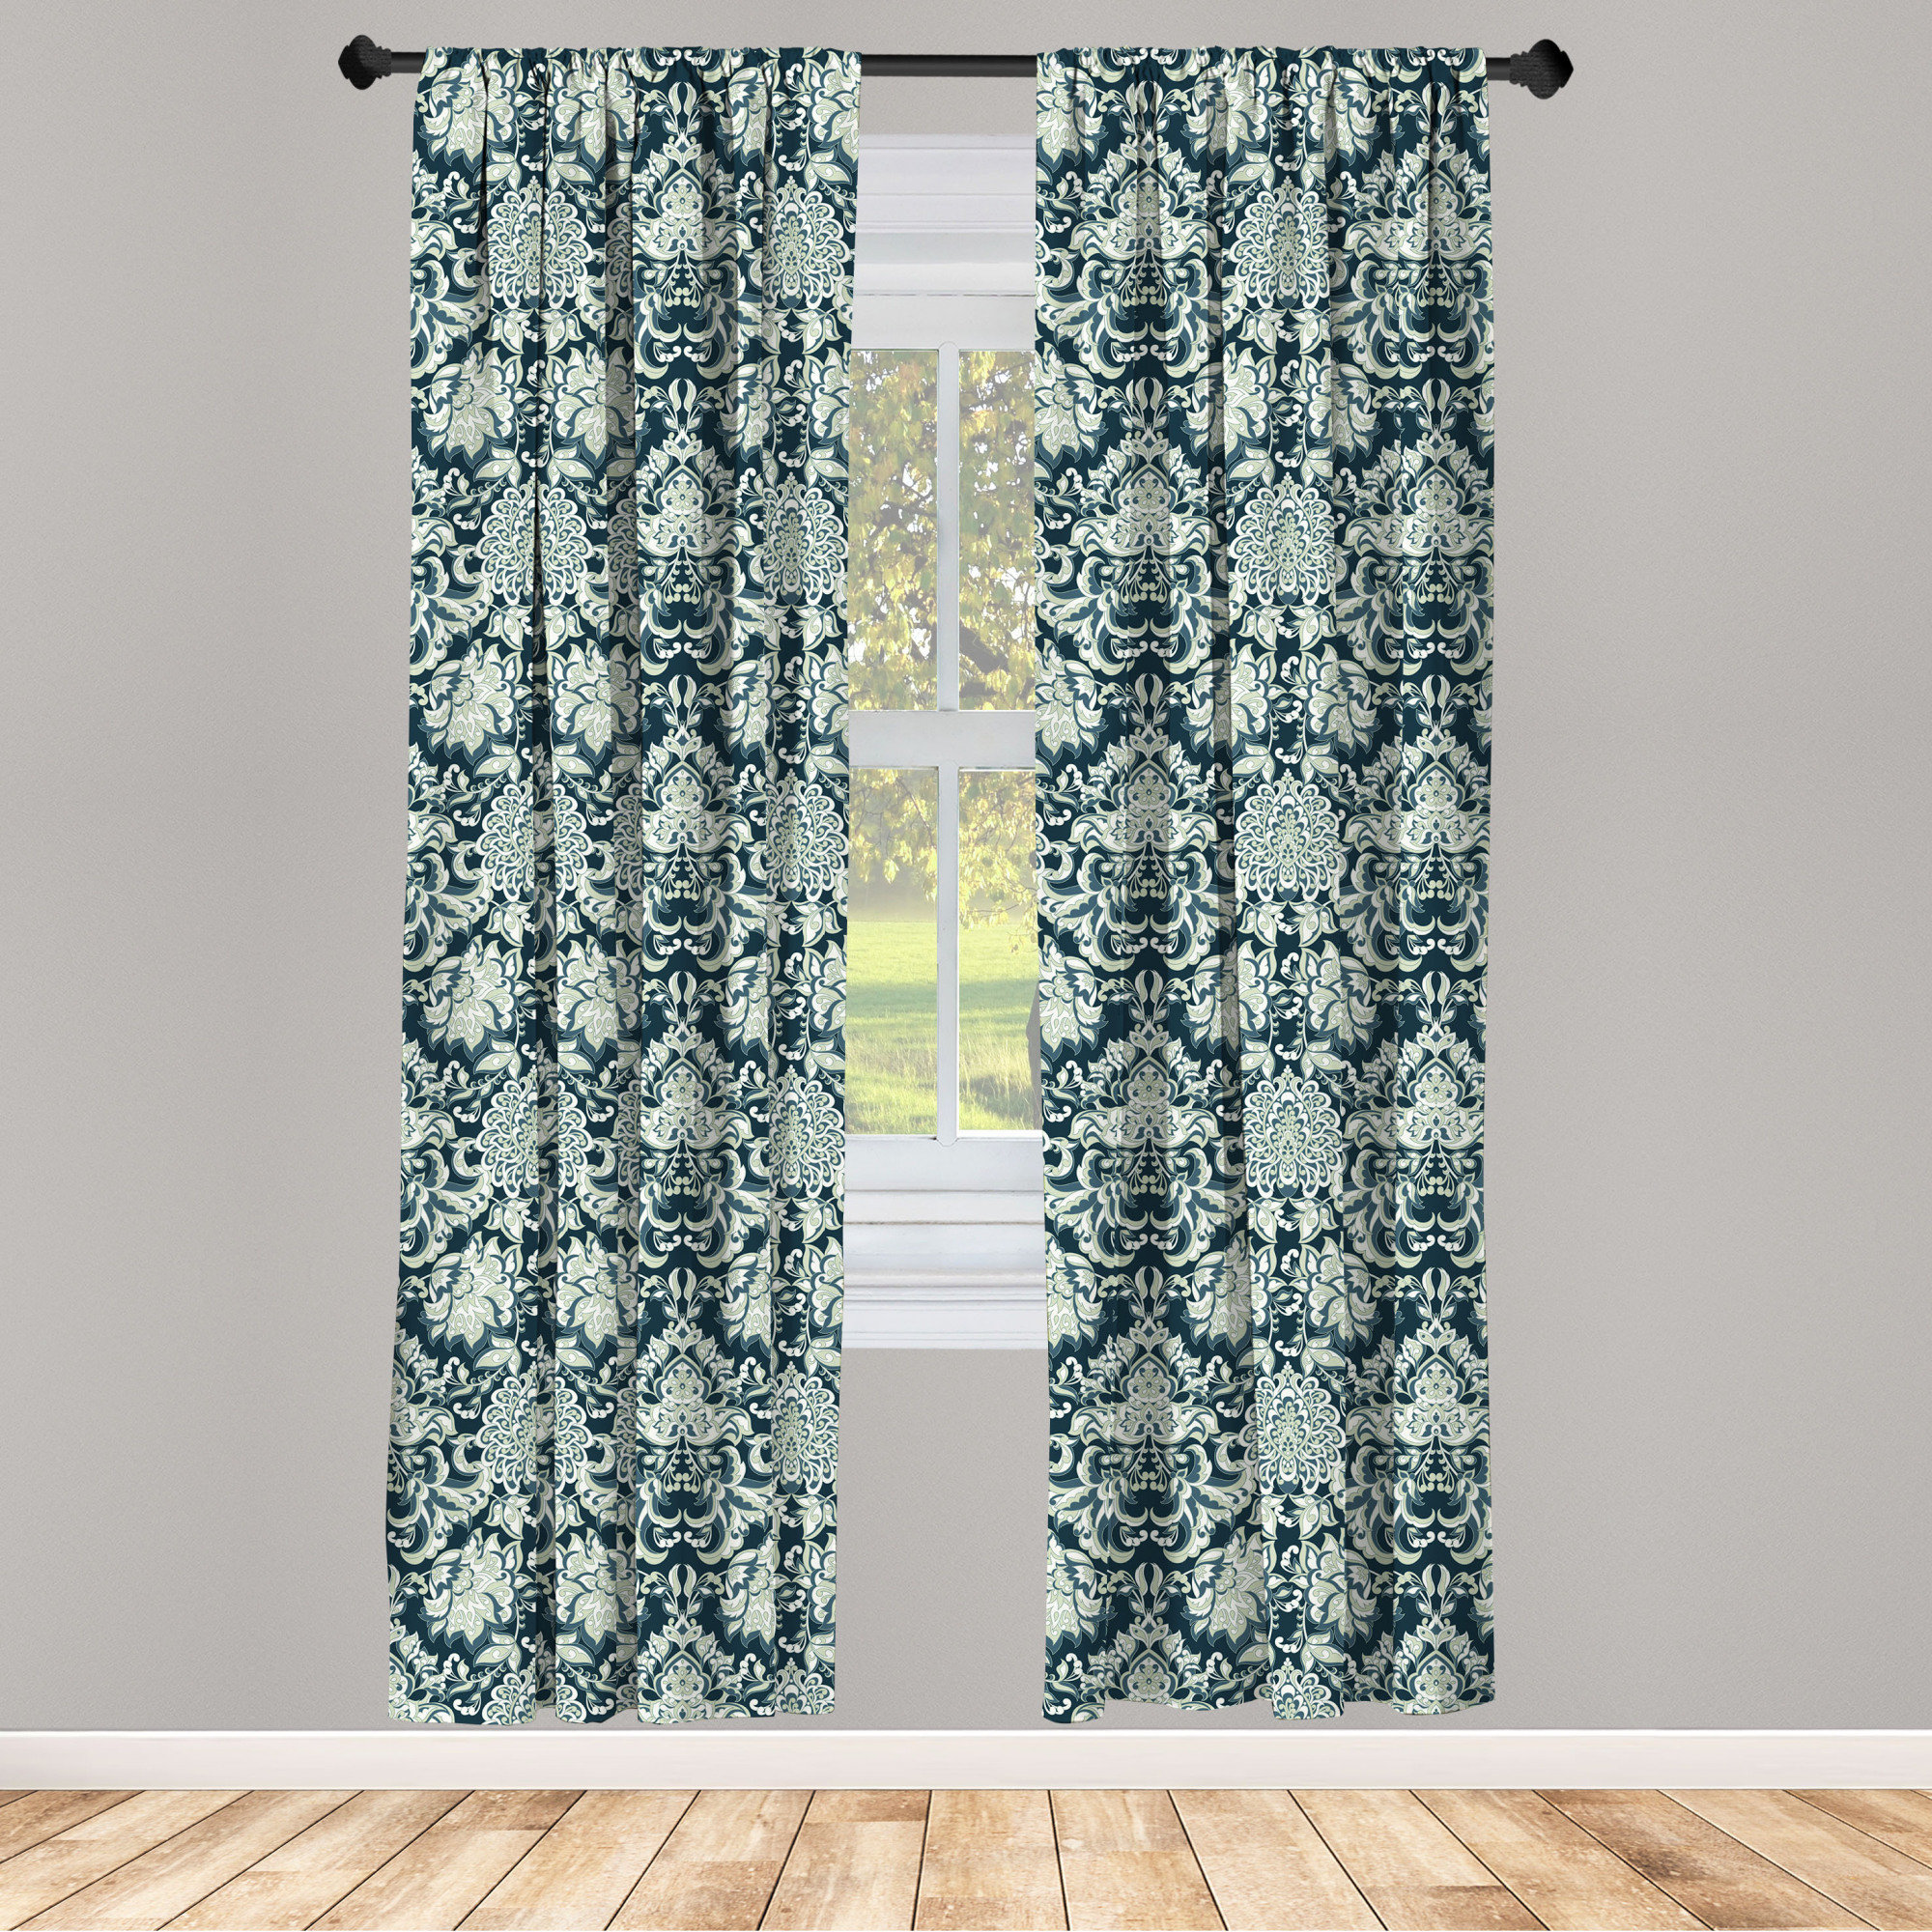 East Urban Home Ambesonne Vintage Window Curtains, Victorian Baroque  Foliage Leaves Pattern With Ornamental Swirls, Lightweight Decorative  Panels Set Of 2 With Rod Pocket, 56